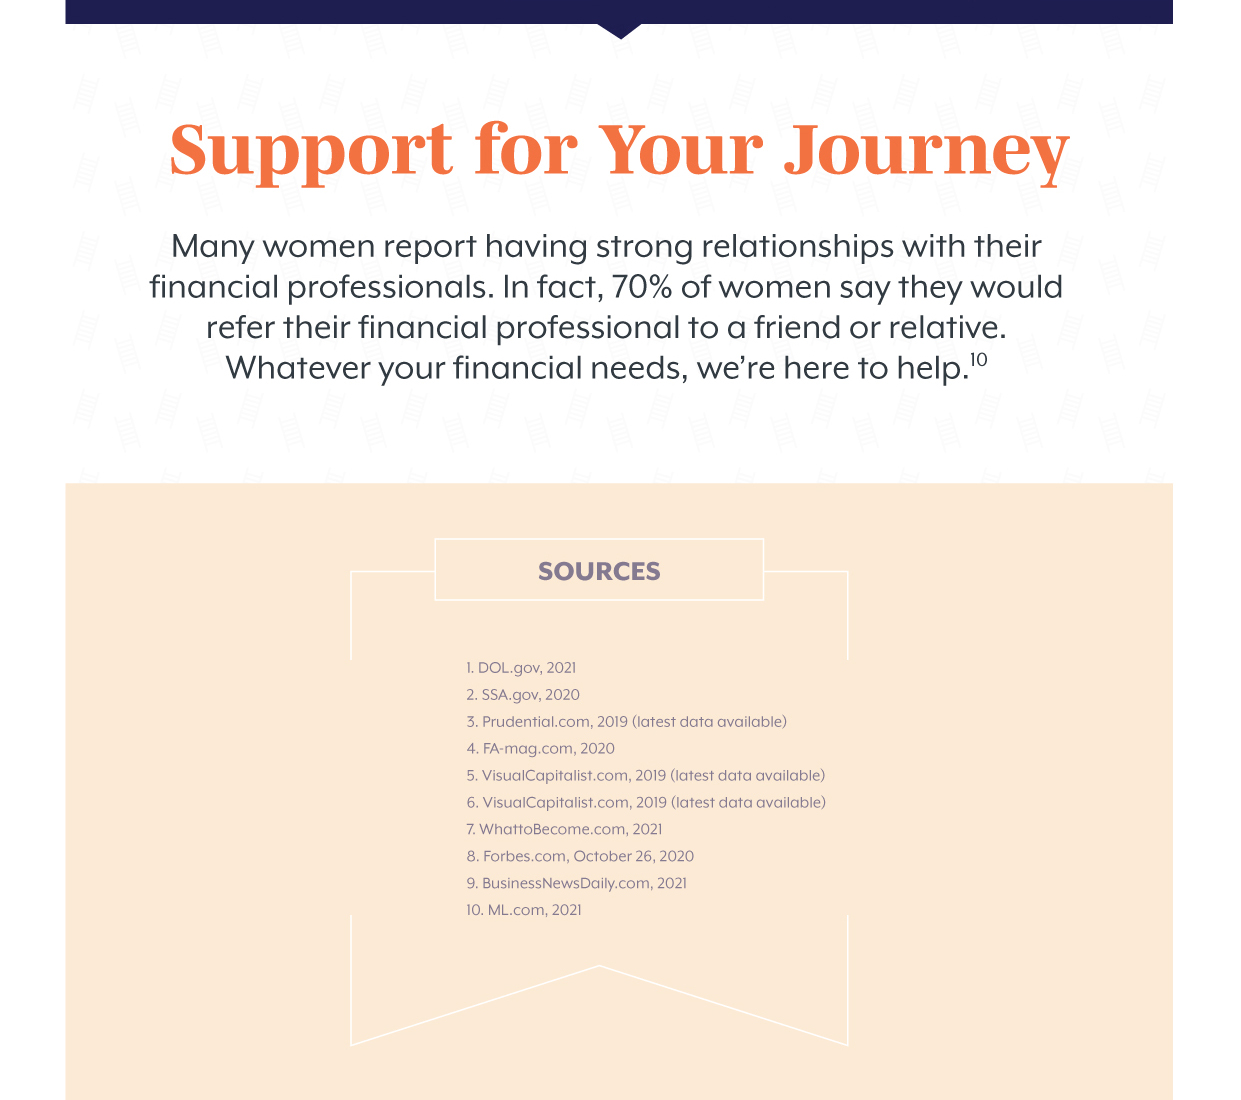 Support for the Journey Many women report having strong relationships with their financial professionals. In fact, 70% of women say they would refer their financial rpfessional to a friend or relative. Whatever your financial needs, we're here to help (10). Sources: 1. DOL.gov, 2021; 2. SSA.gov, 2020; 3. Prudential.com, 2019 (latest data available); 4. FA-mag, 2020; 5. Visualcapitalist.com, 2019; 6. Visualcapitalist.com, 2019; 7. WhattoBecome.com, 2021; 8. Forbes.com, October 26, 2020; 9. BusinessNewsDaily.com, 2021; 10. ML.com, 2021